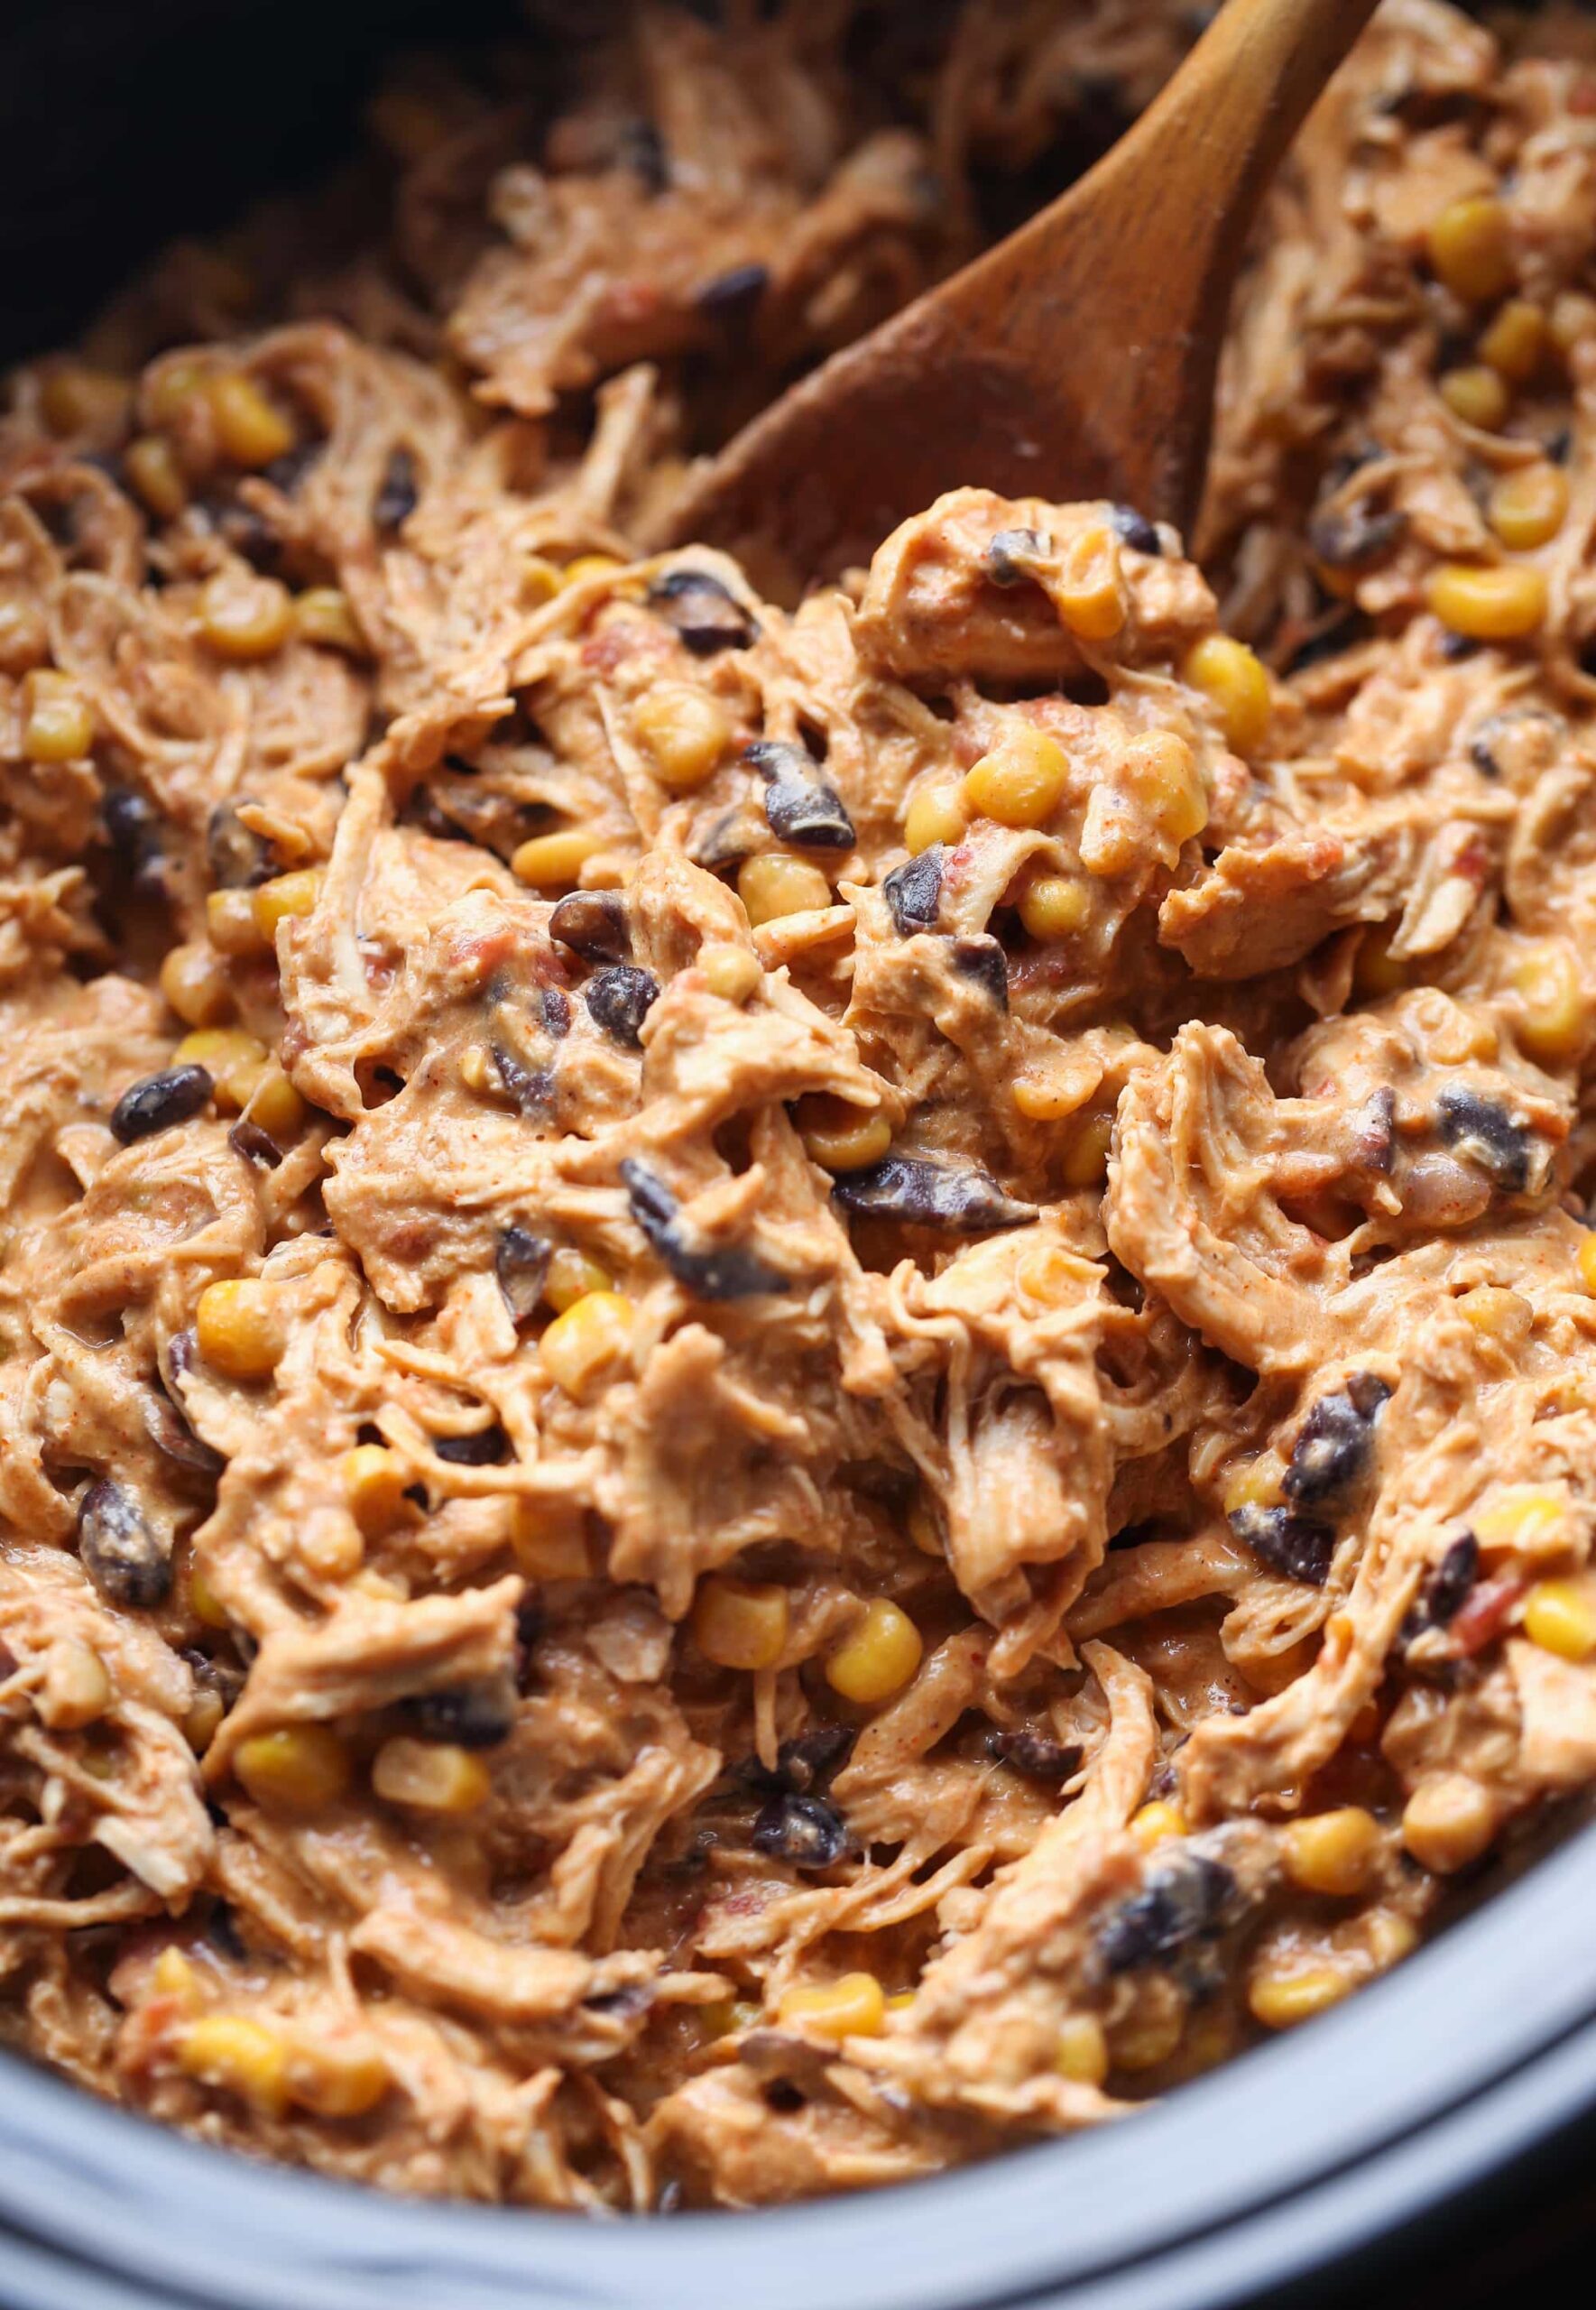 A Slow Cooker Full of Creamy Fiesta Chicken Being Stirred with a Wooden Spoon